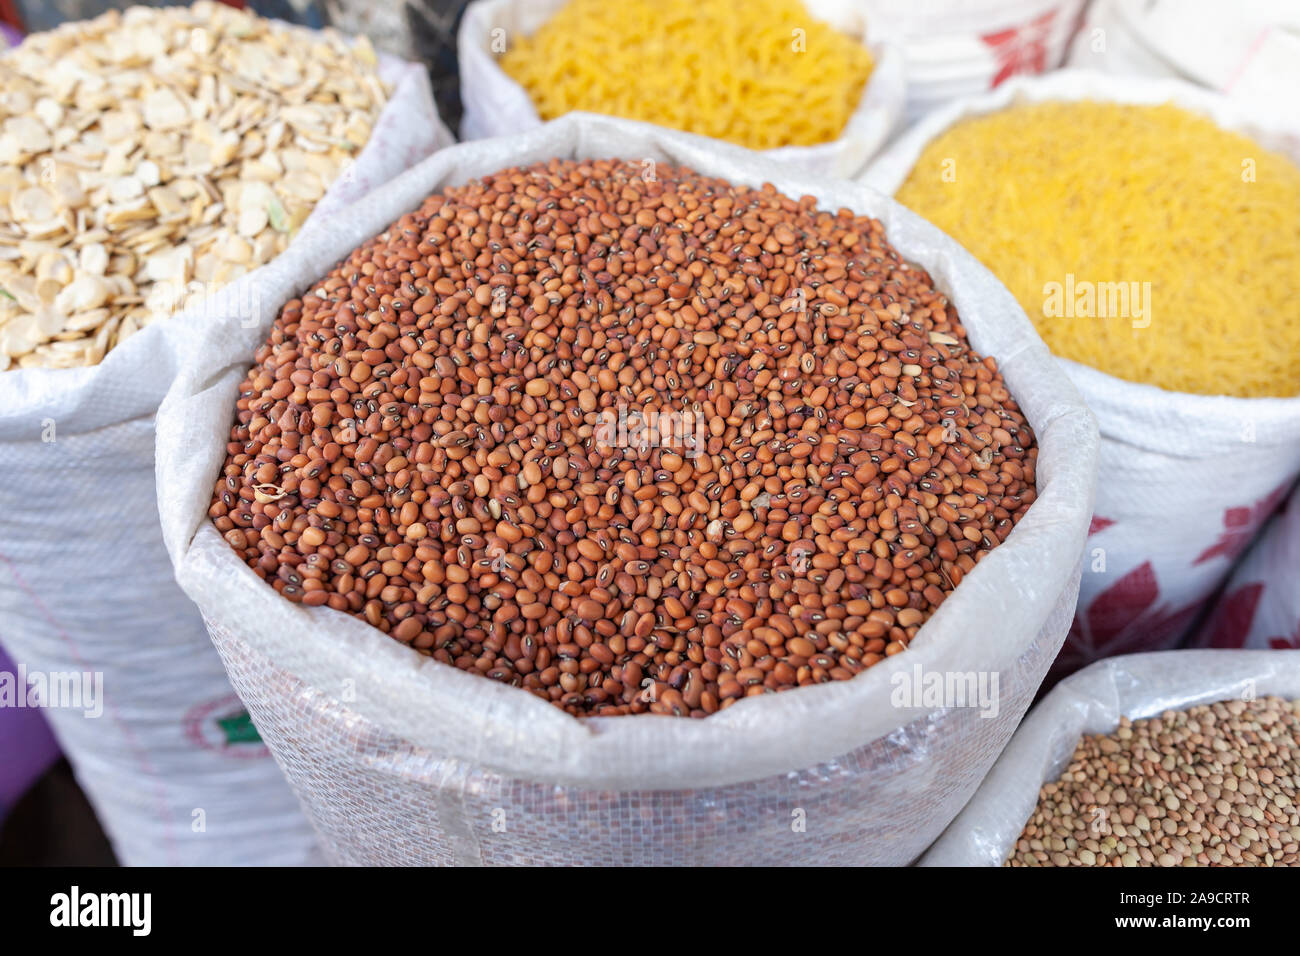 Different kind of ingredients as beans, corn, lentils all filled in bags in a grocery store in Morocco. Typical arrangement of everyday food. Stock Photo